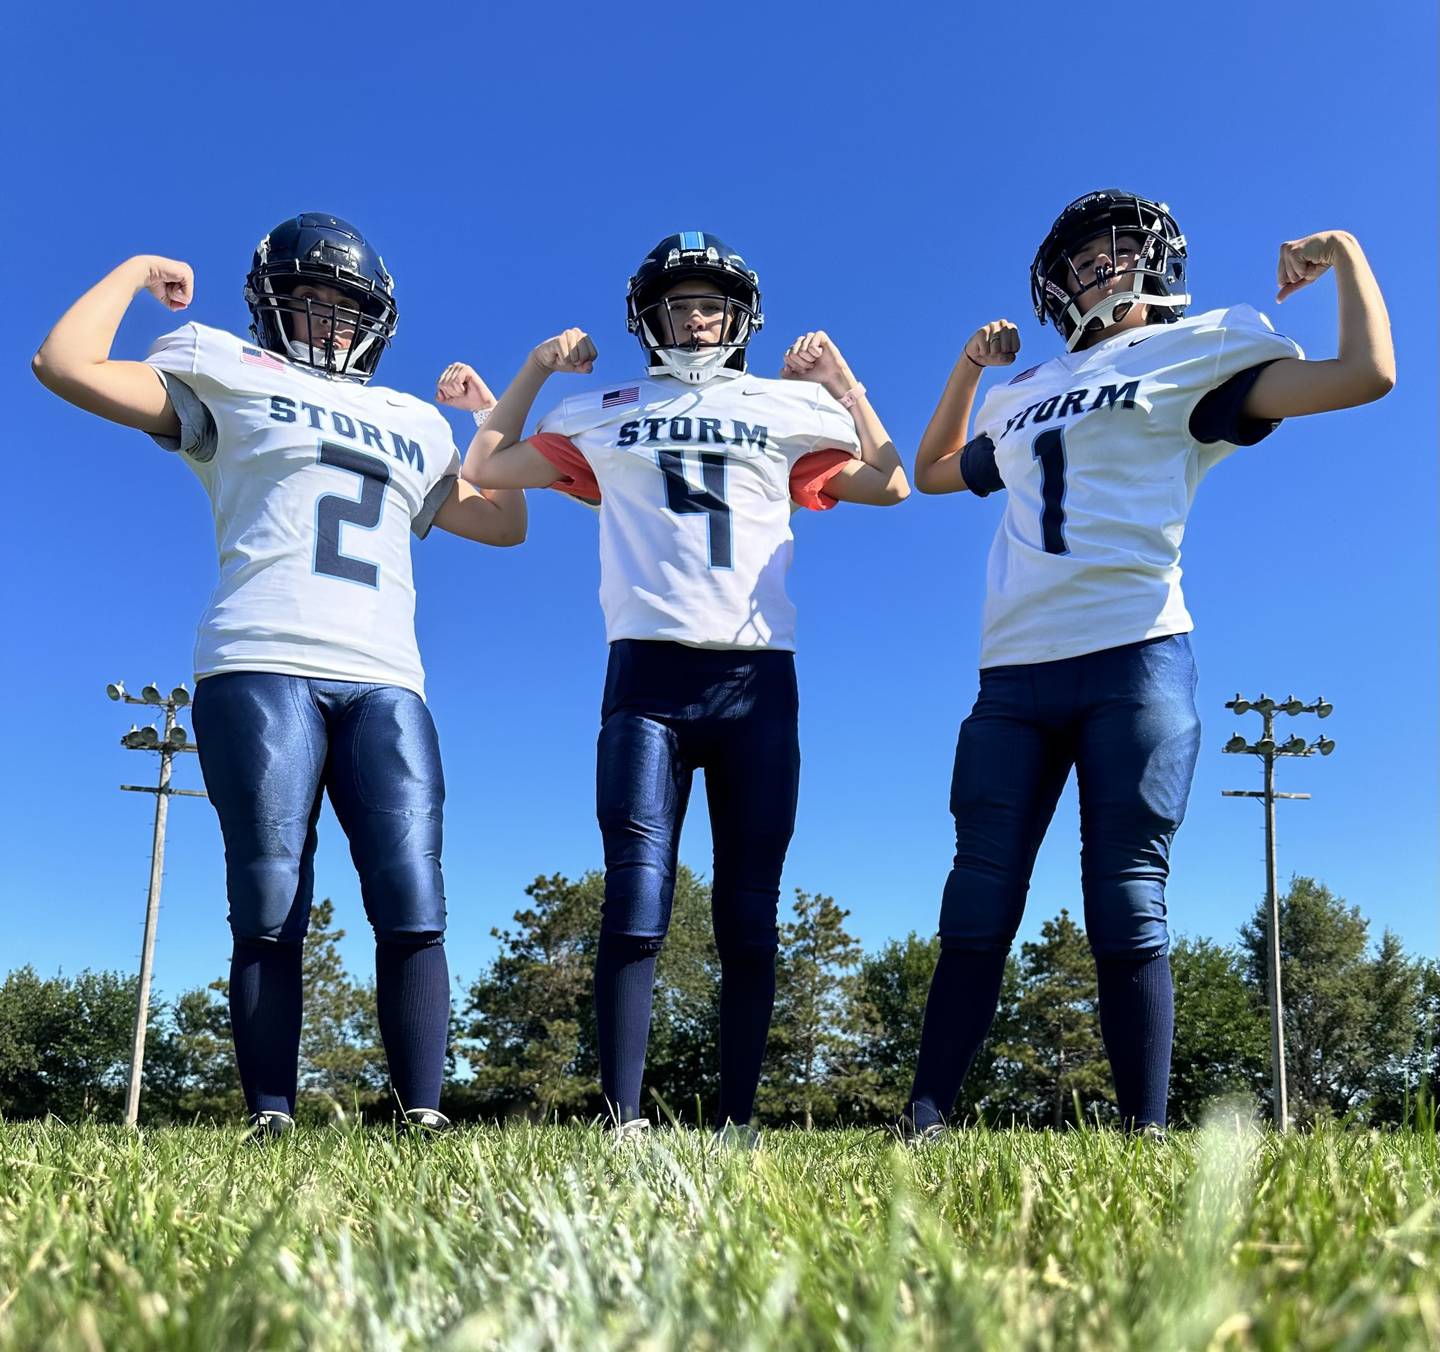 Bureau Valley managers Taylor Rowland (from left), Ryley Egan and Makenna Maupin had a tradition of suiting up in full pads on the first day of practice each fall. Maupin will be an equipment manager for the Iowa State University football team this fall.